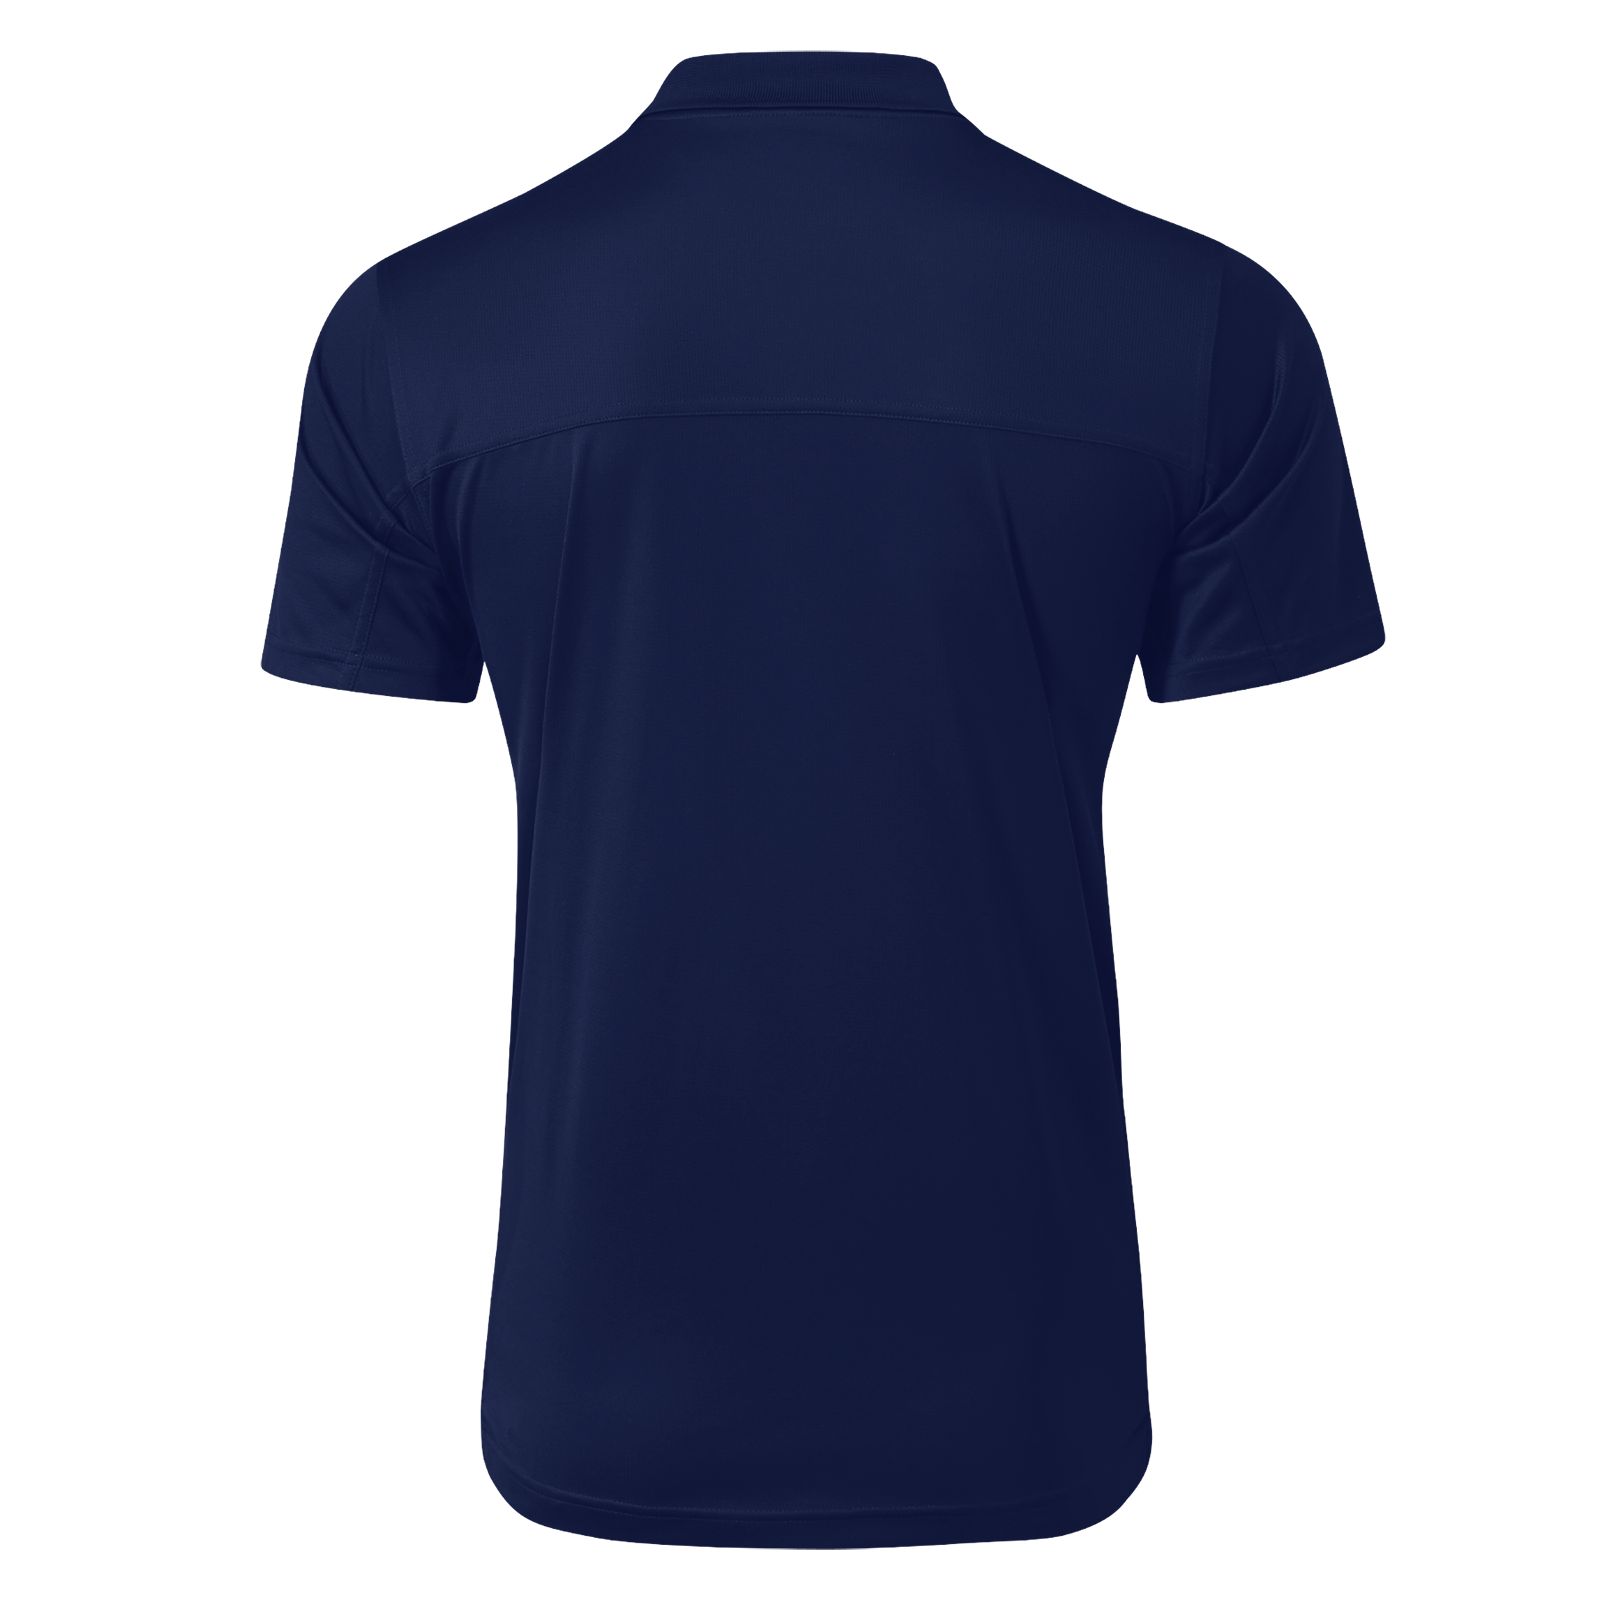 Men's Performance Tech Polo, Team Navy image number 2